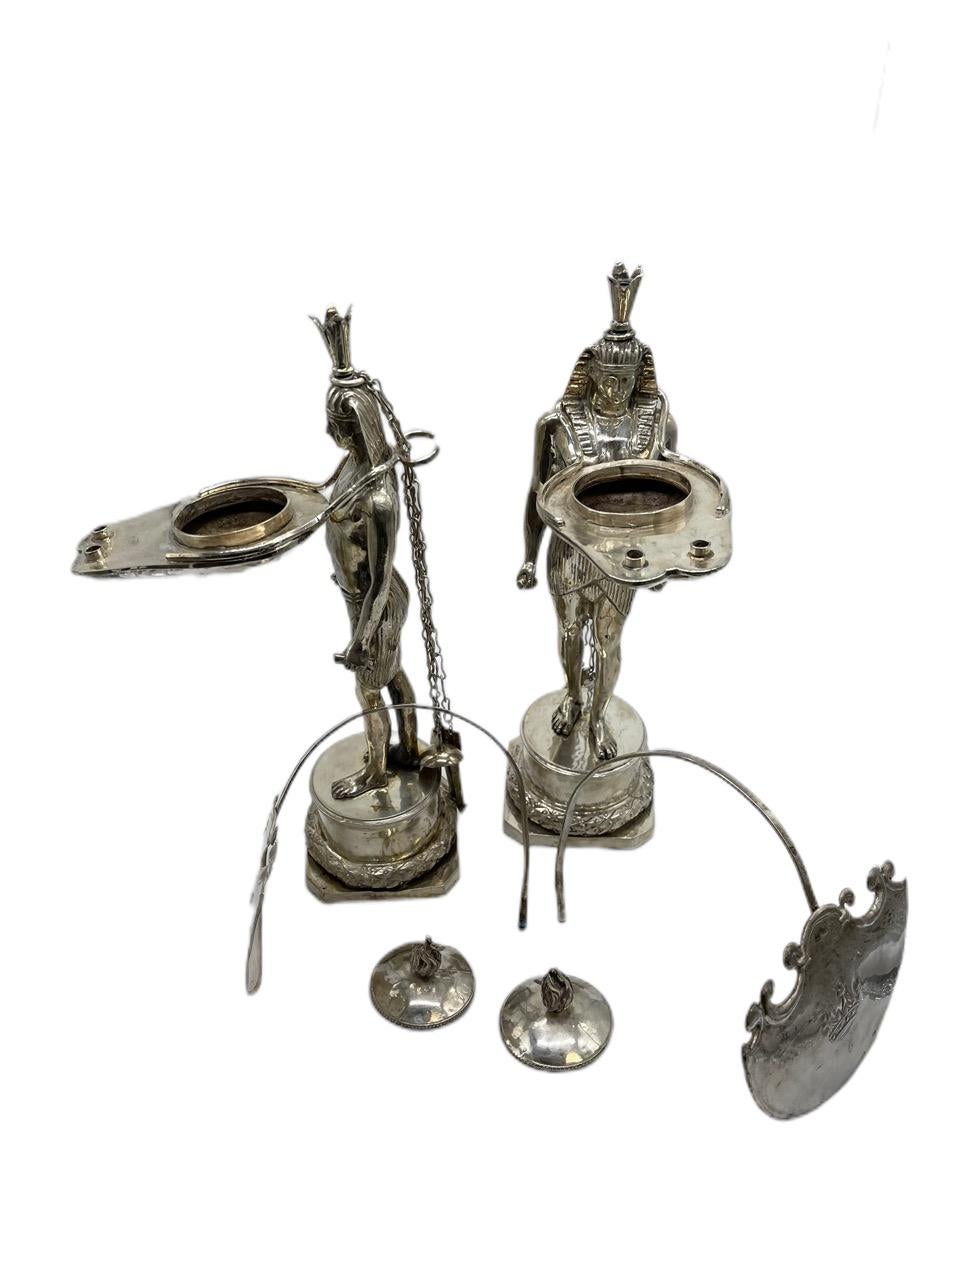 Pair of Early 19th Century Italian Antique Silver Oil Lamps by Vincenzo Belli II For Sale 12